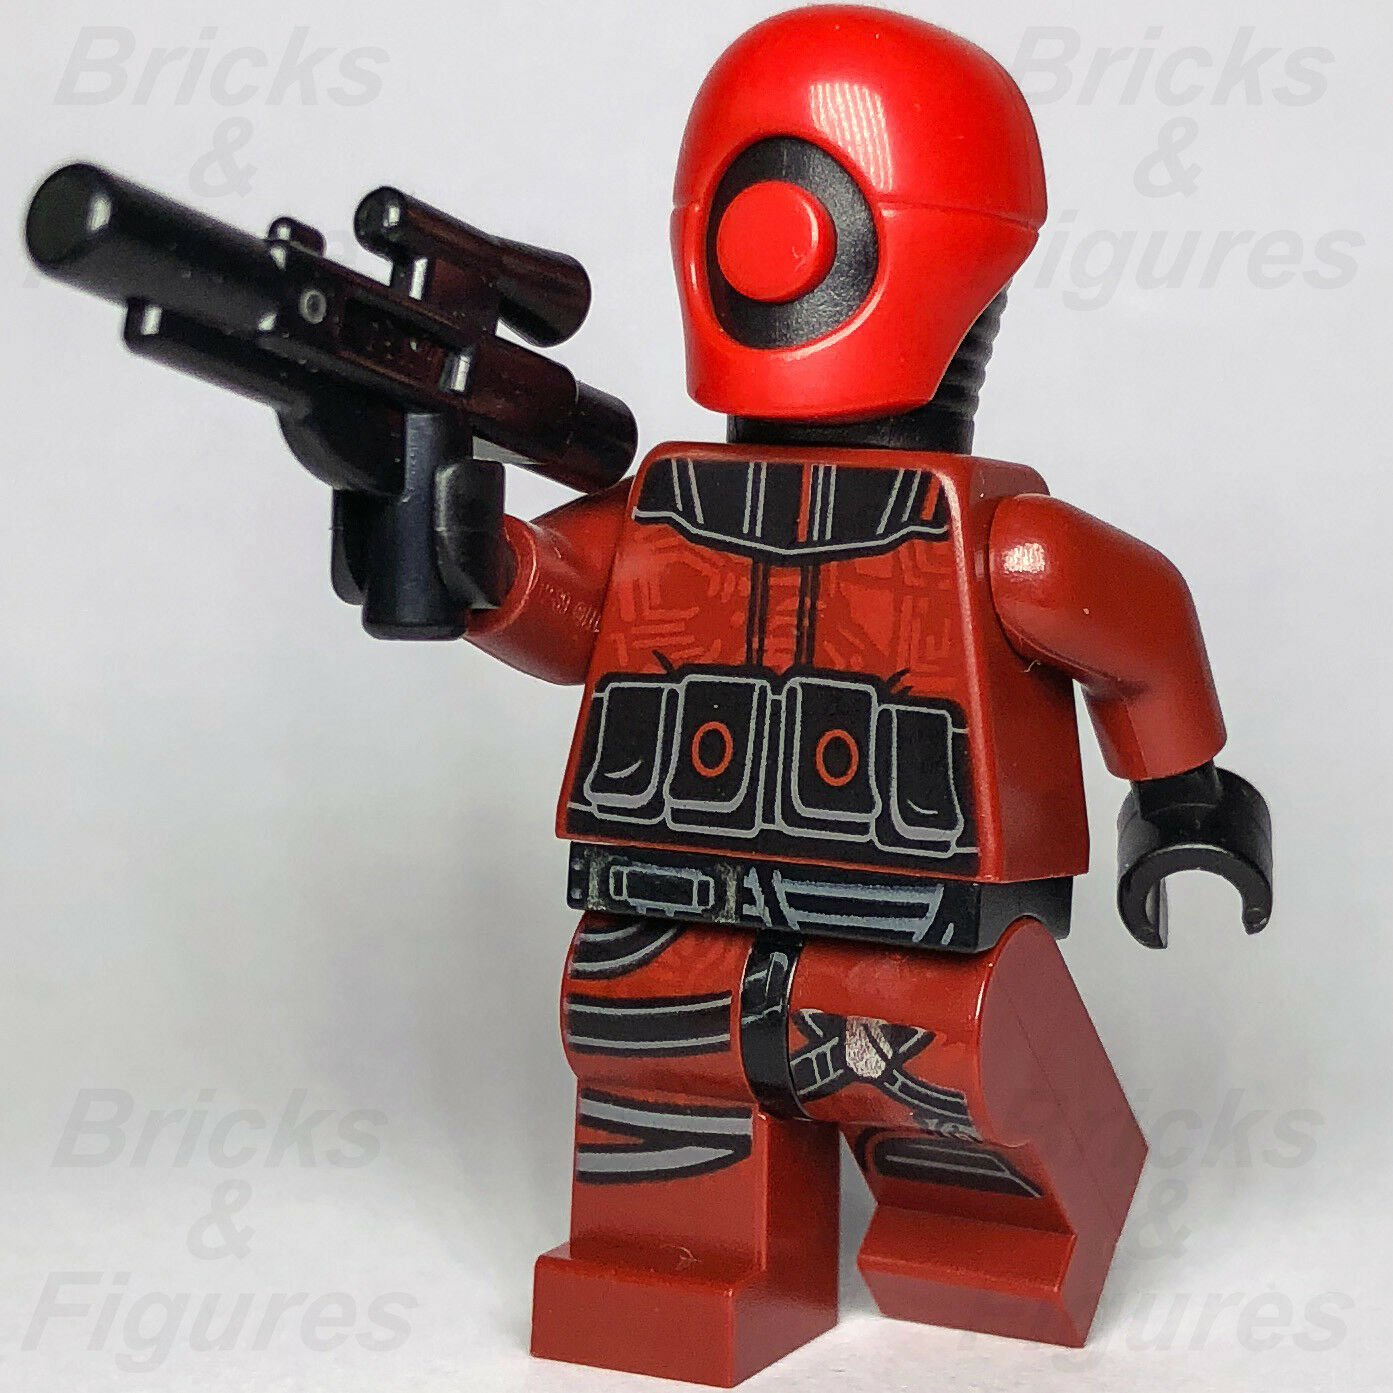 New Star Wars LEGO Guavian Security Soldier The Force Awakens Minifigure 75180 - Bricks & Figures